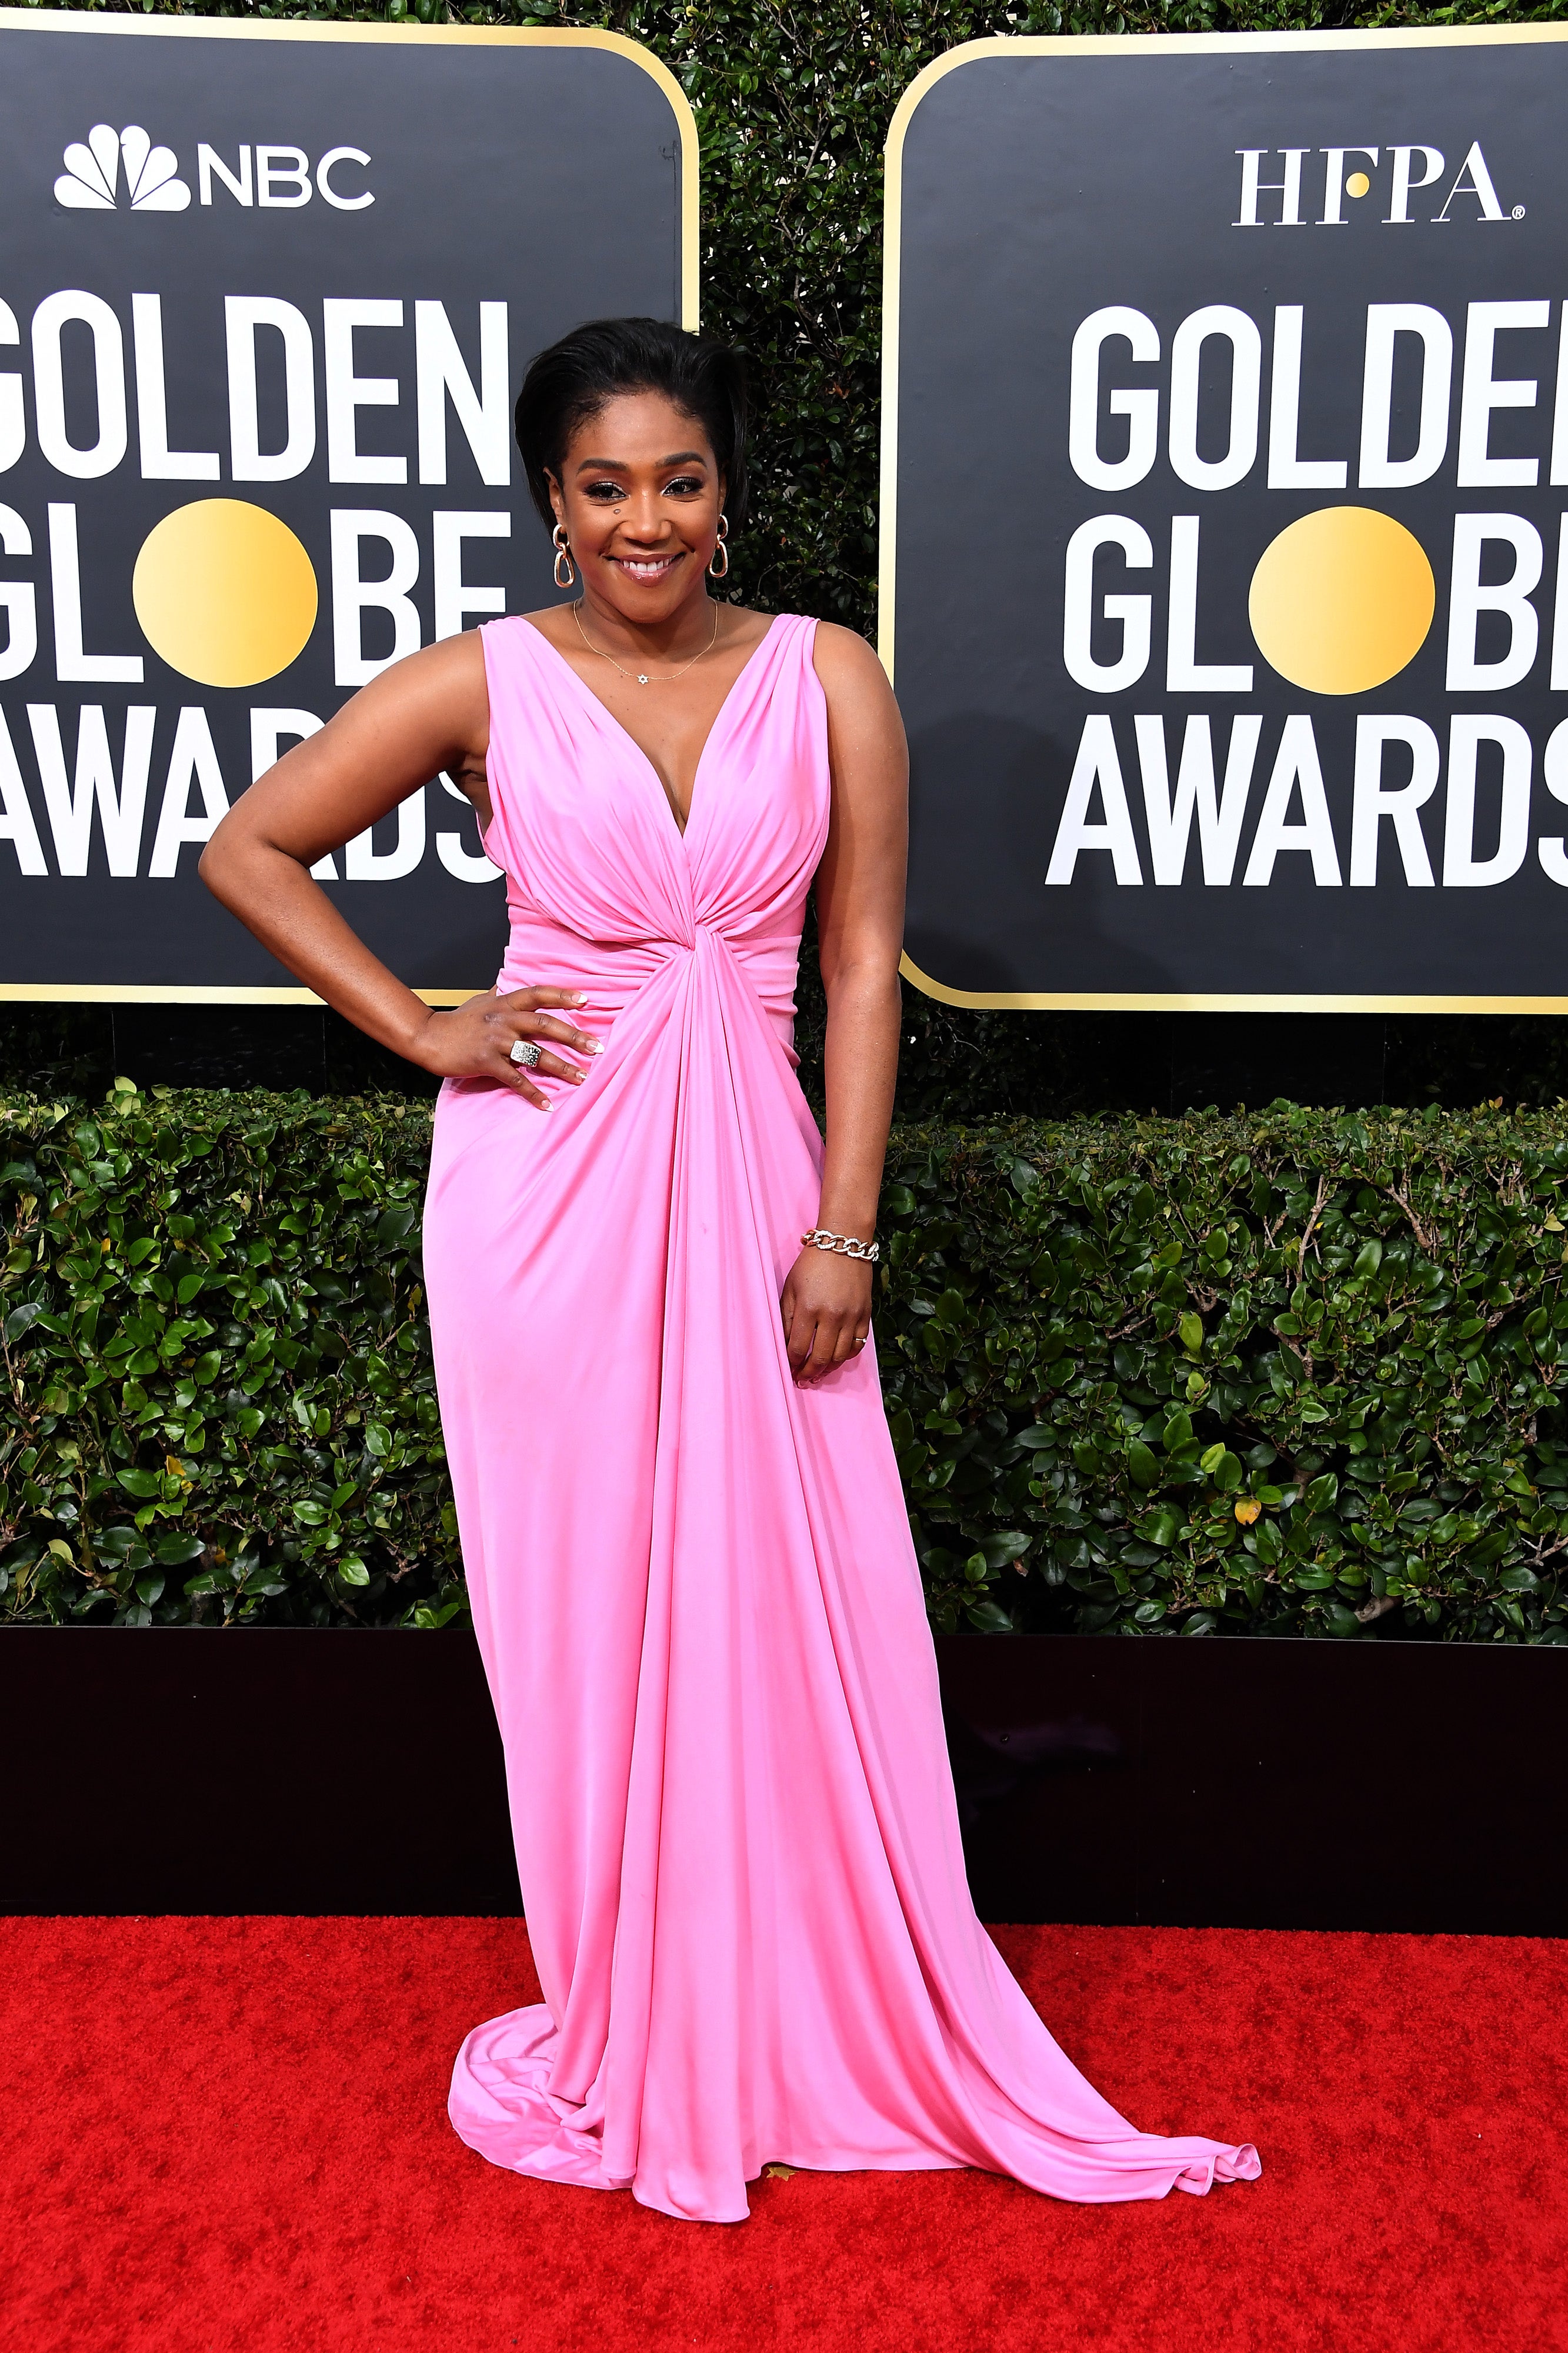 The Best Fashion Moments From The 2020 Golden Globes